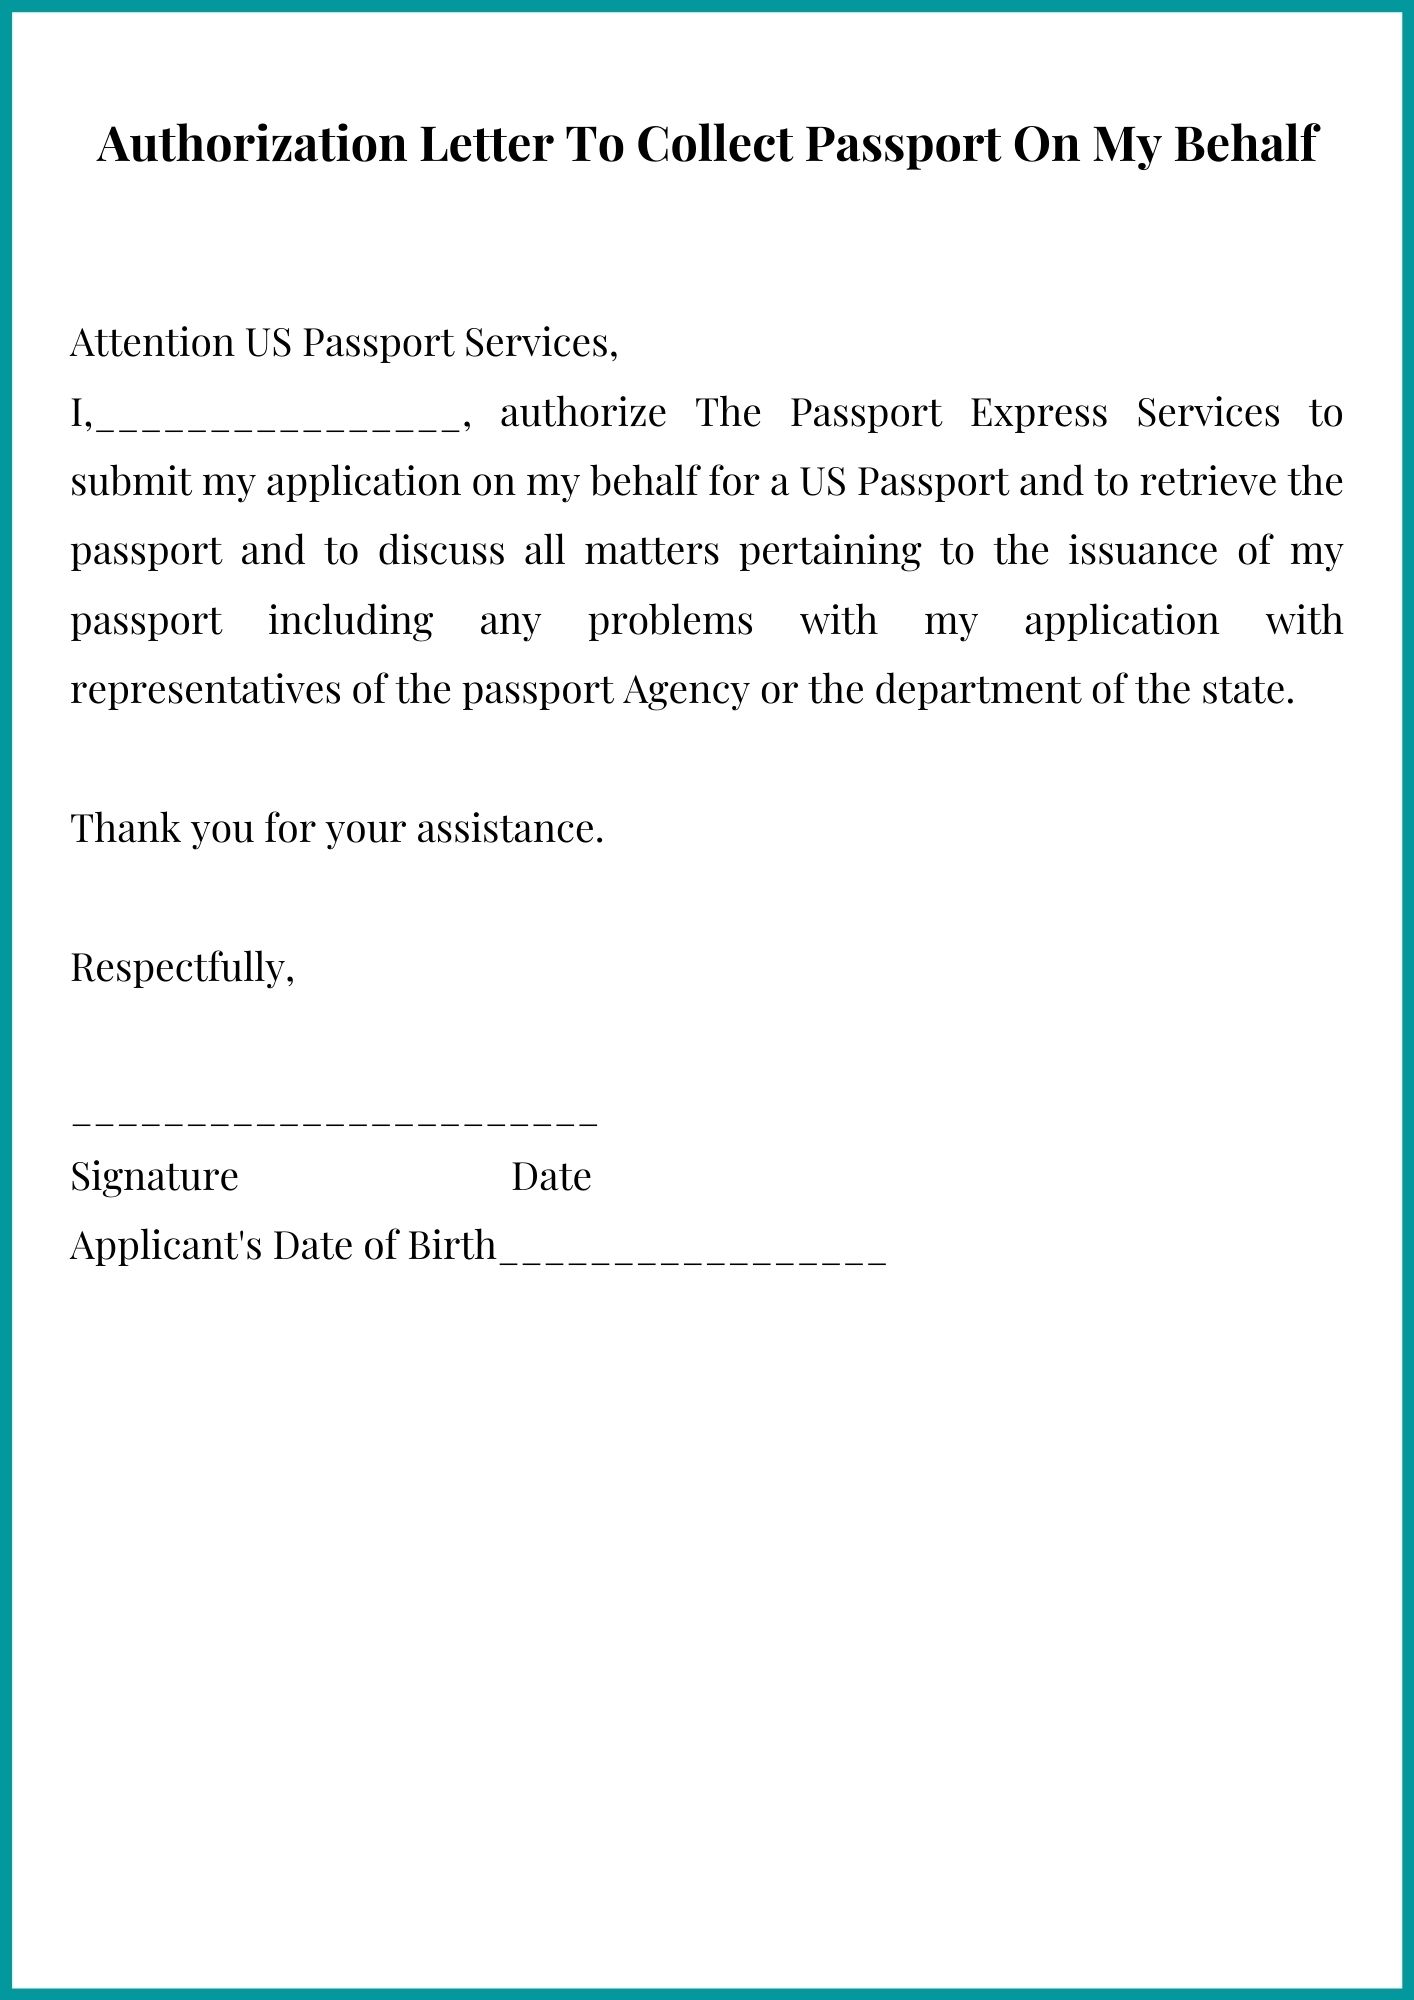 sample-authorization-letter-for-passport-template-format-495